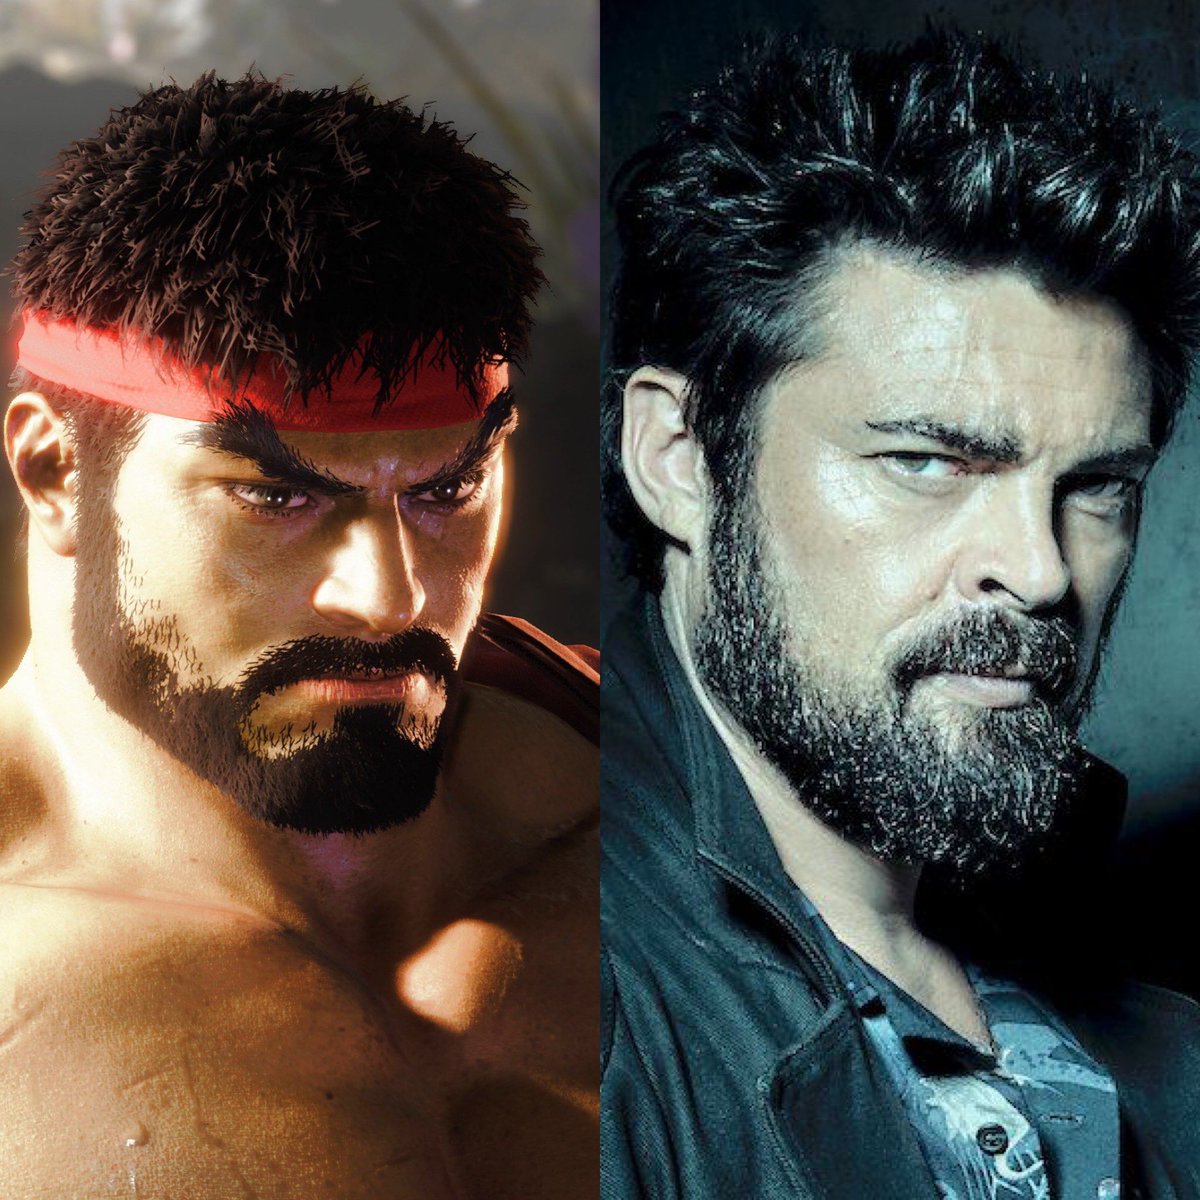 So @CapcomUSA_ can we talk about @StreetFighter Ryu and @KarlUrban resemblance?